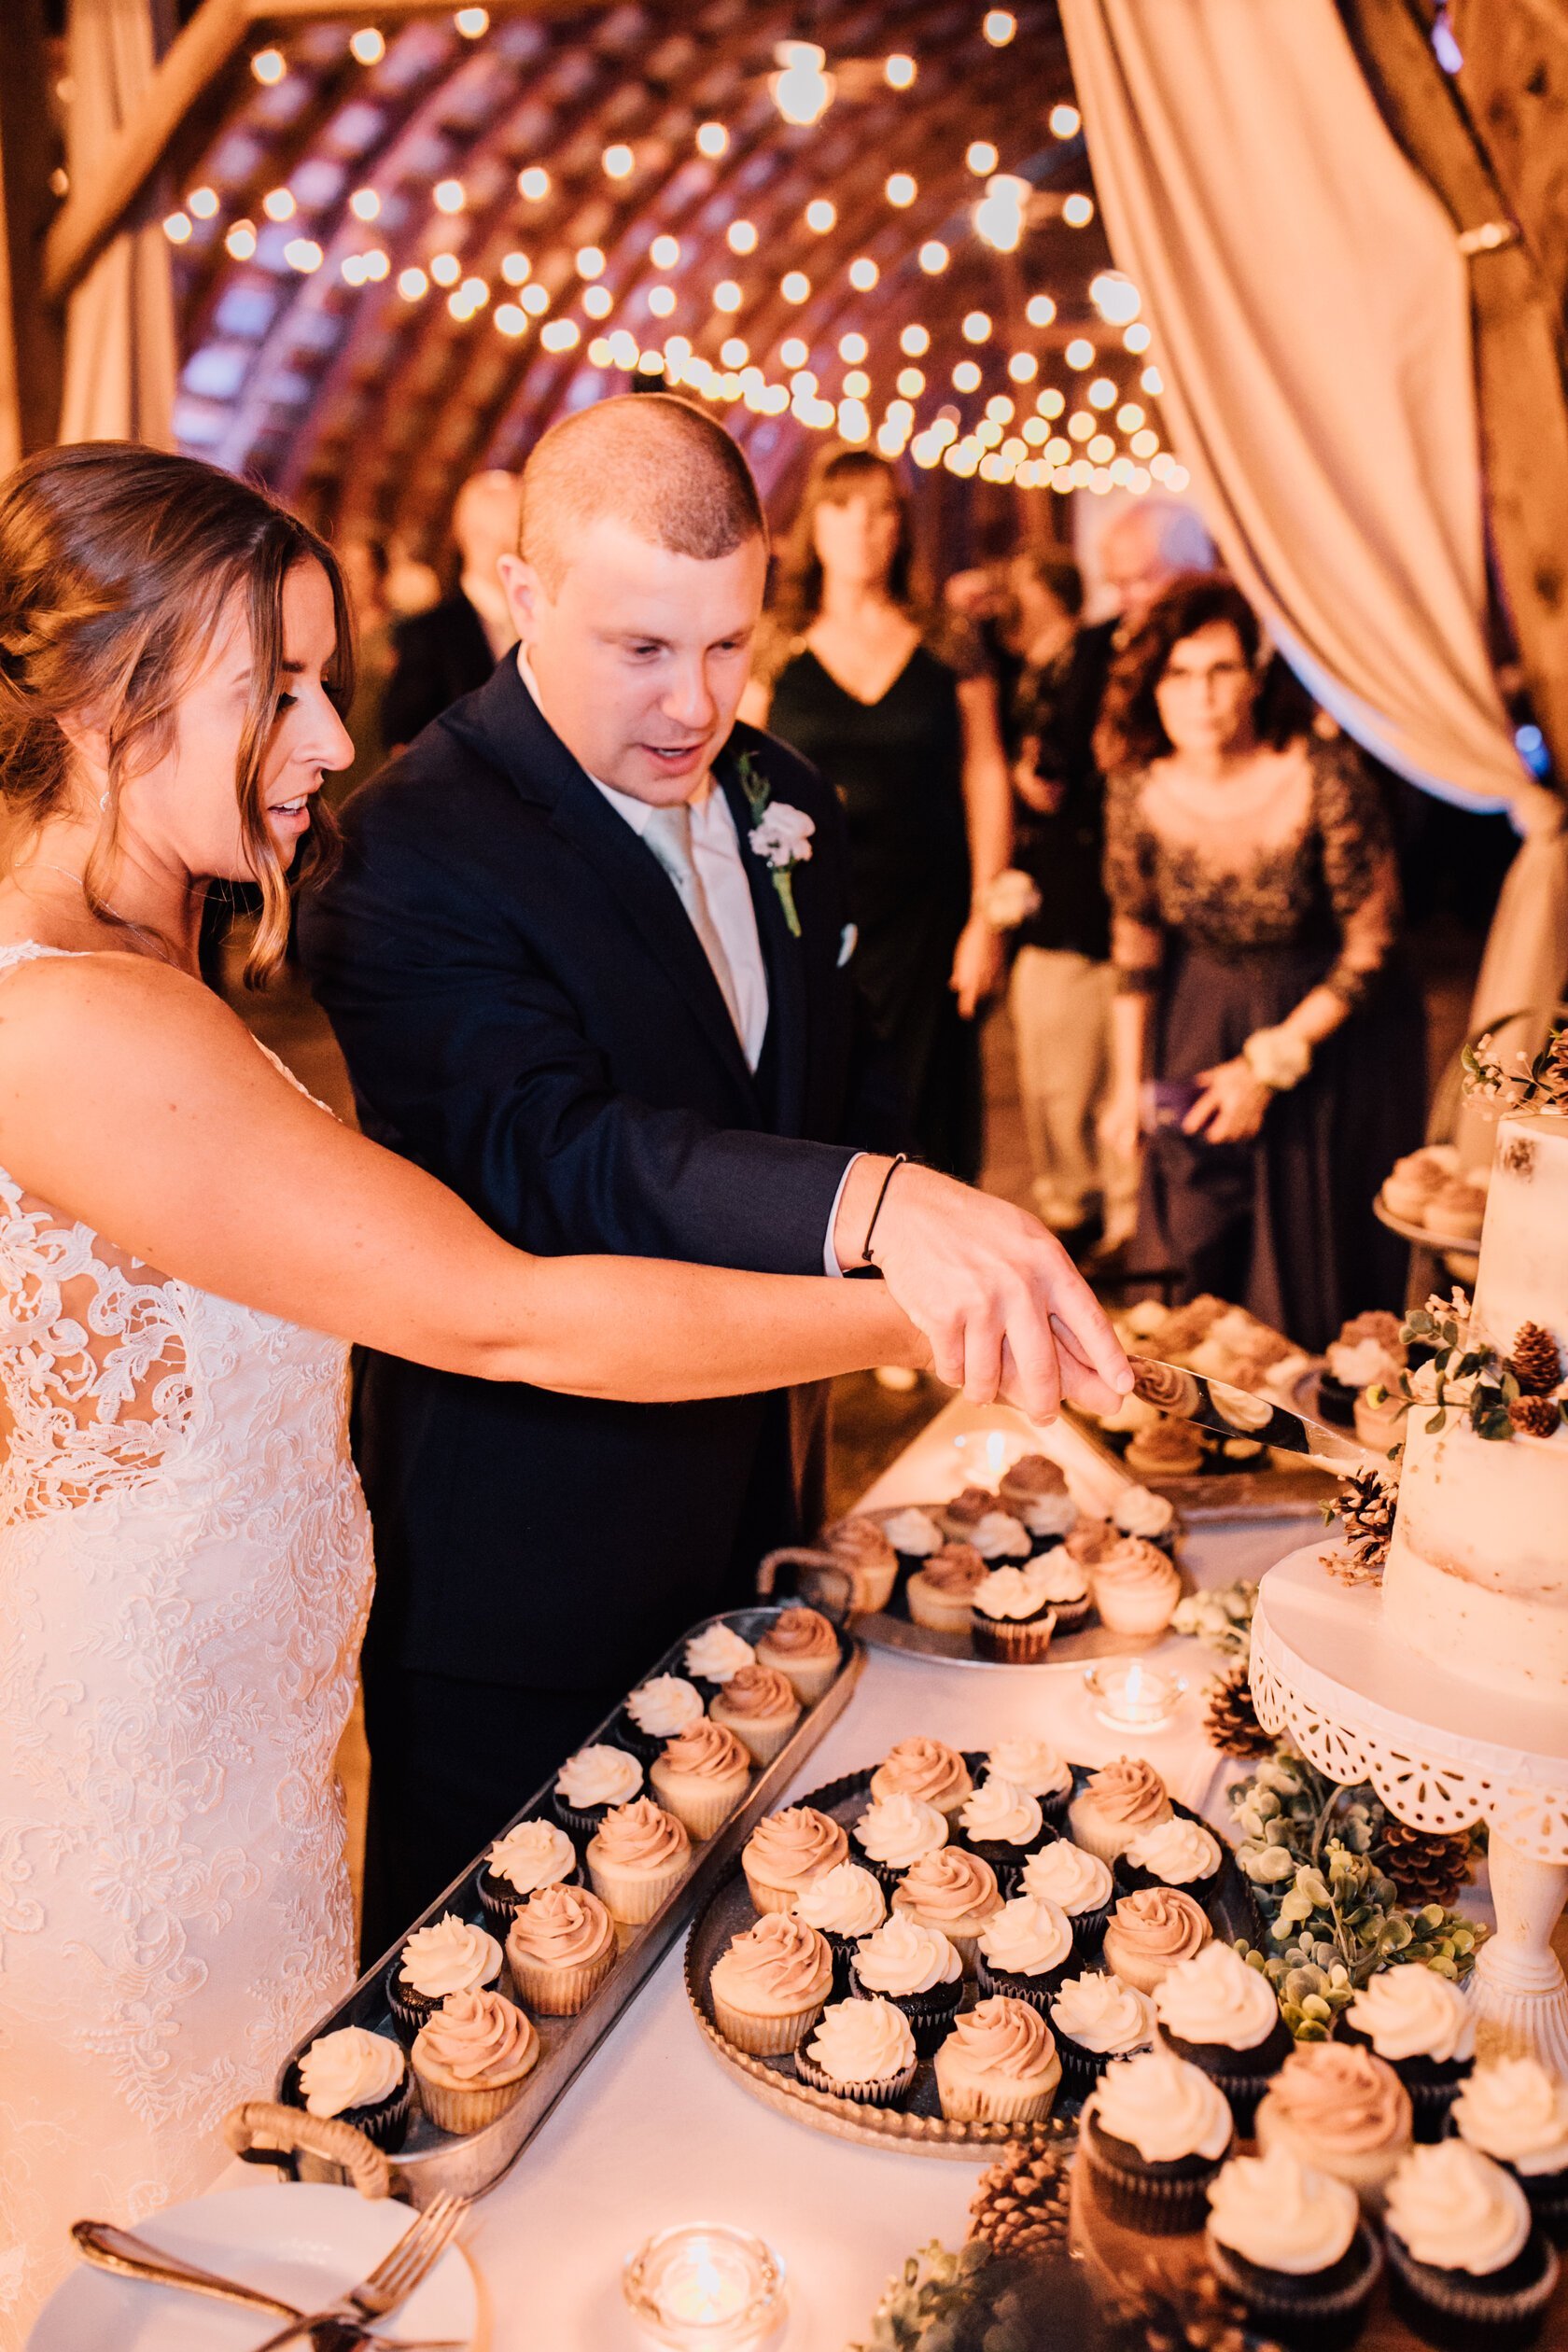  The bride and groom cut their cake at their rustic barn wedding 